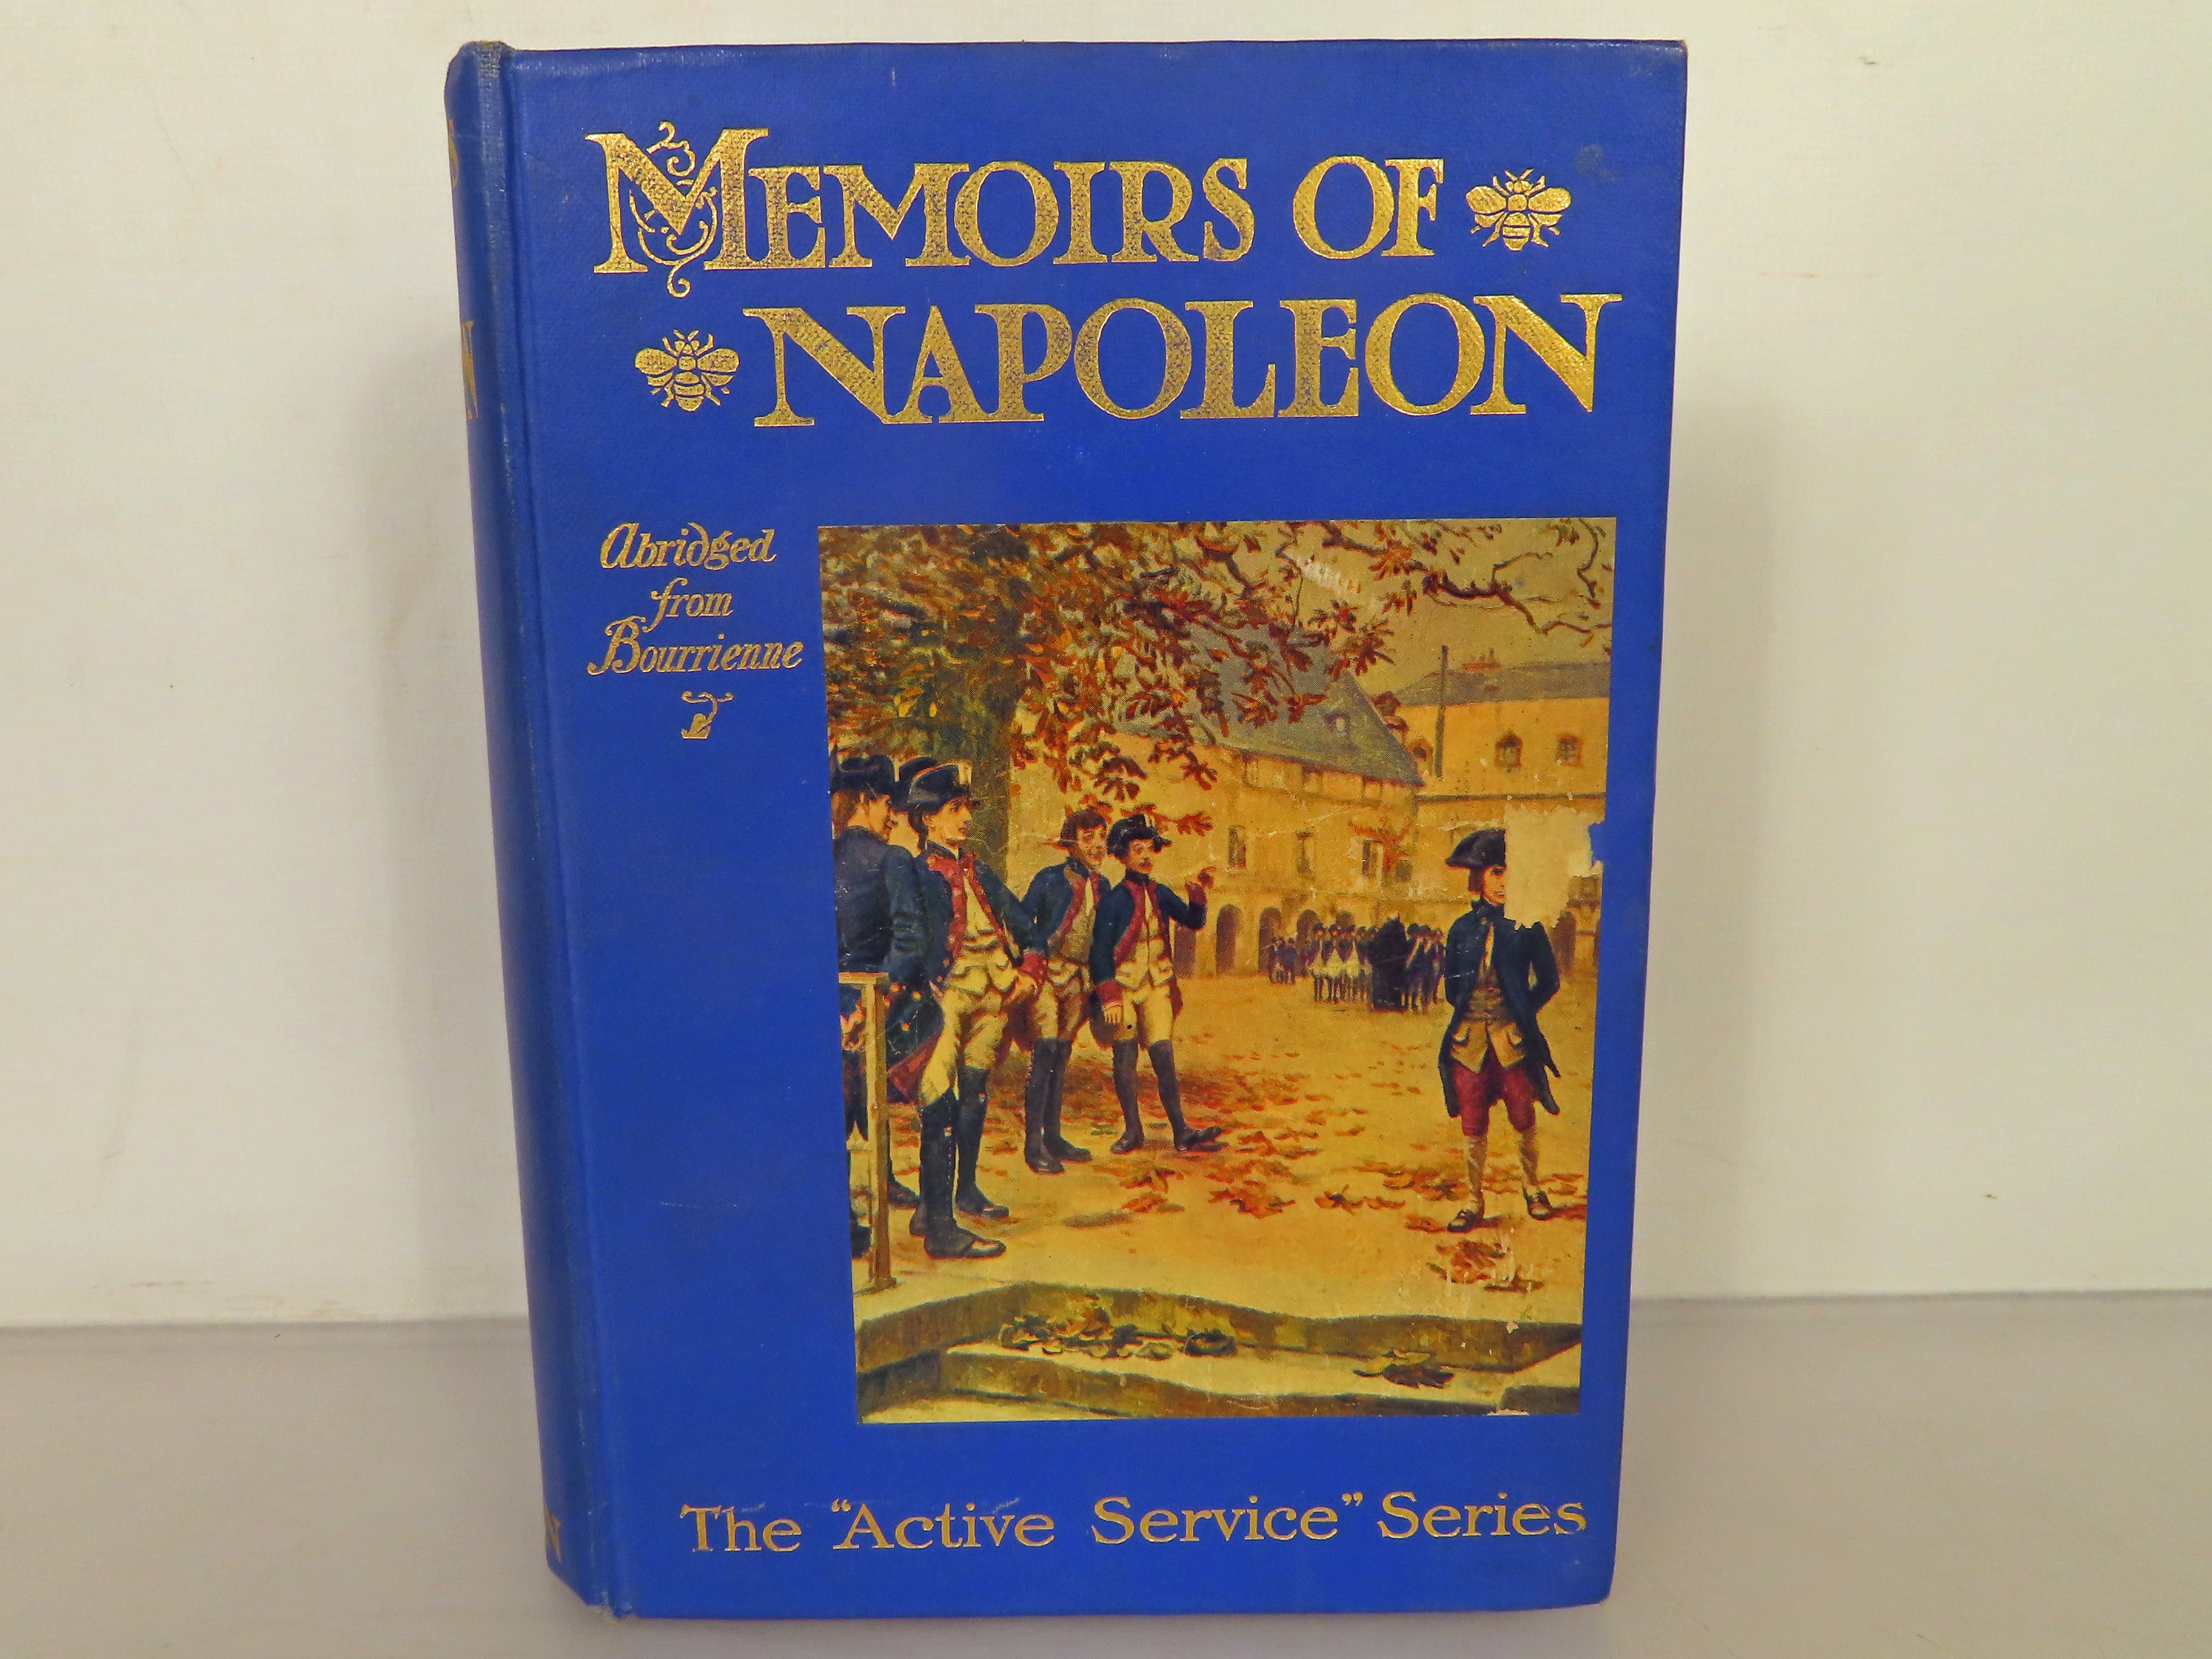 Memoirs of Napoleon The "Active Service" Series by Louis Bourrienne